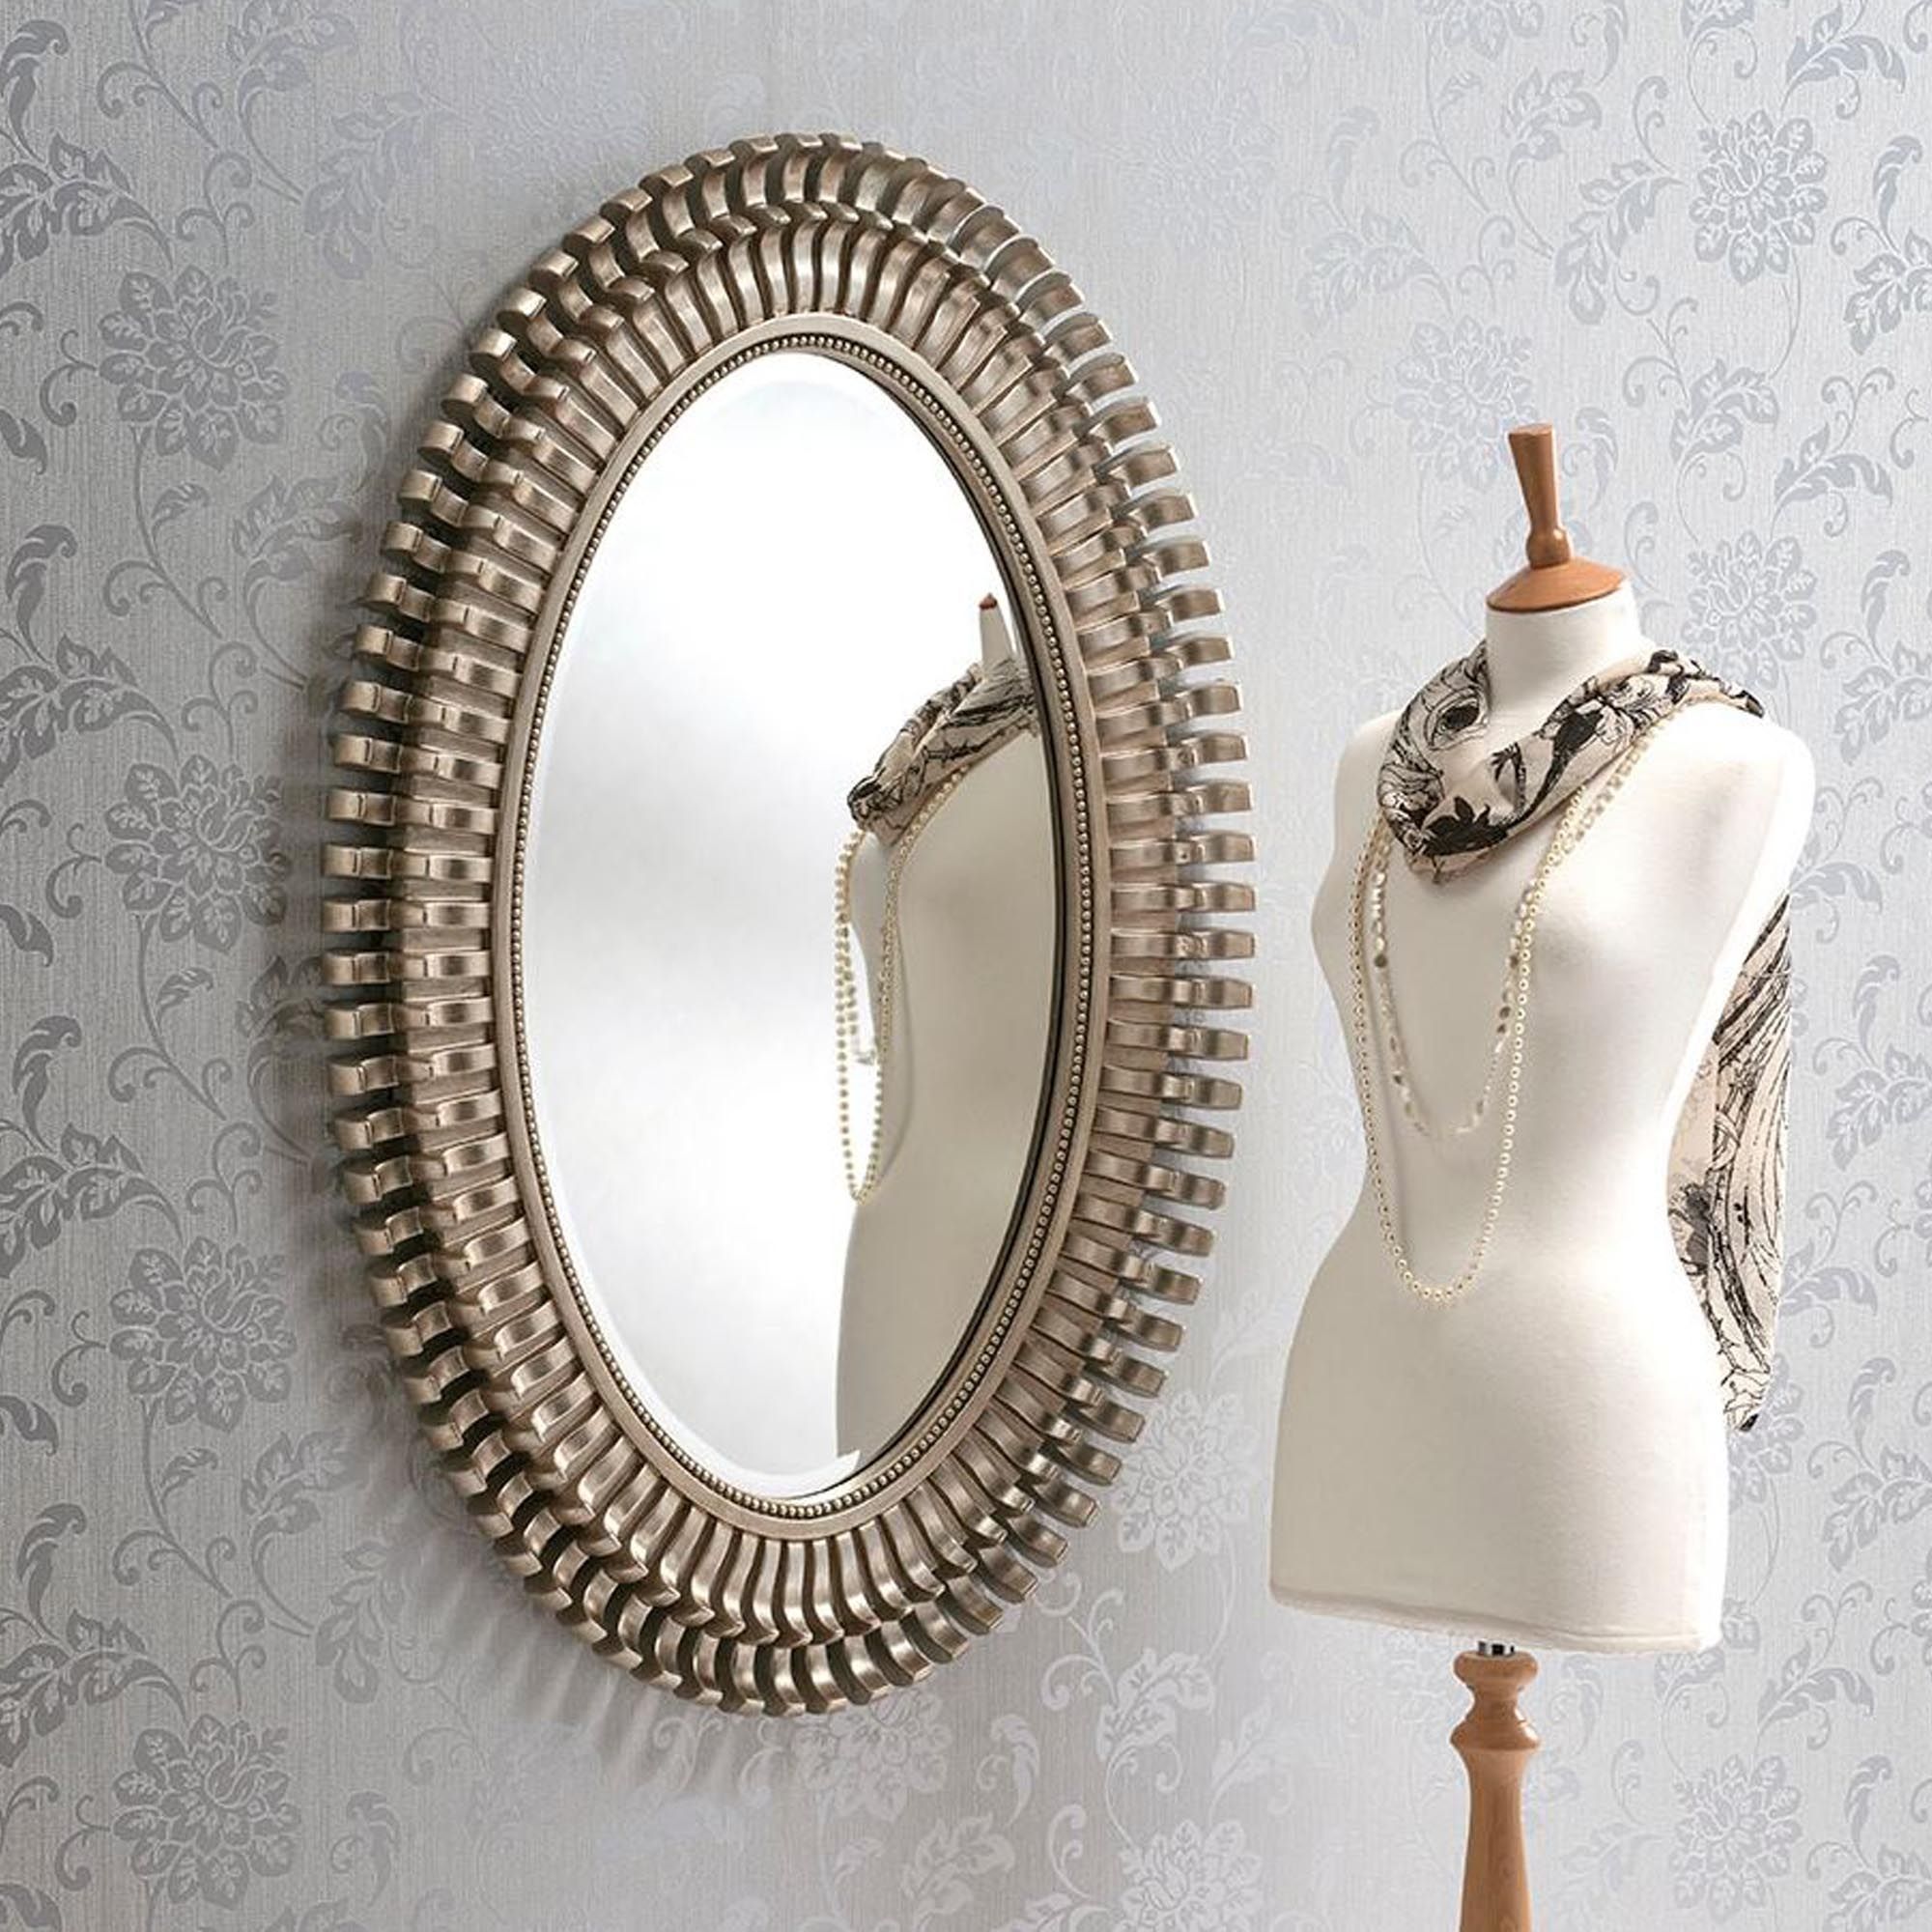 Oval Contemporary Antique Silver Wall Mirror | Homesdirect365 Inside Antiqued Glass Wall Mirrors (View 12 of 15)